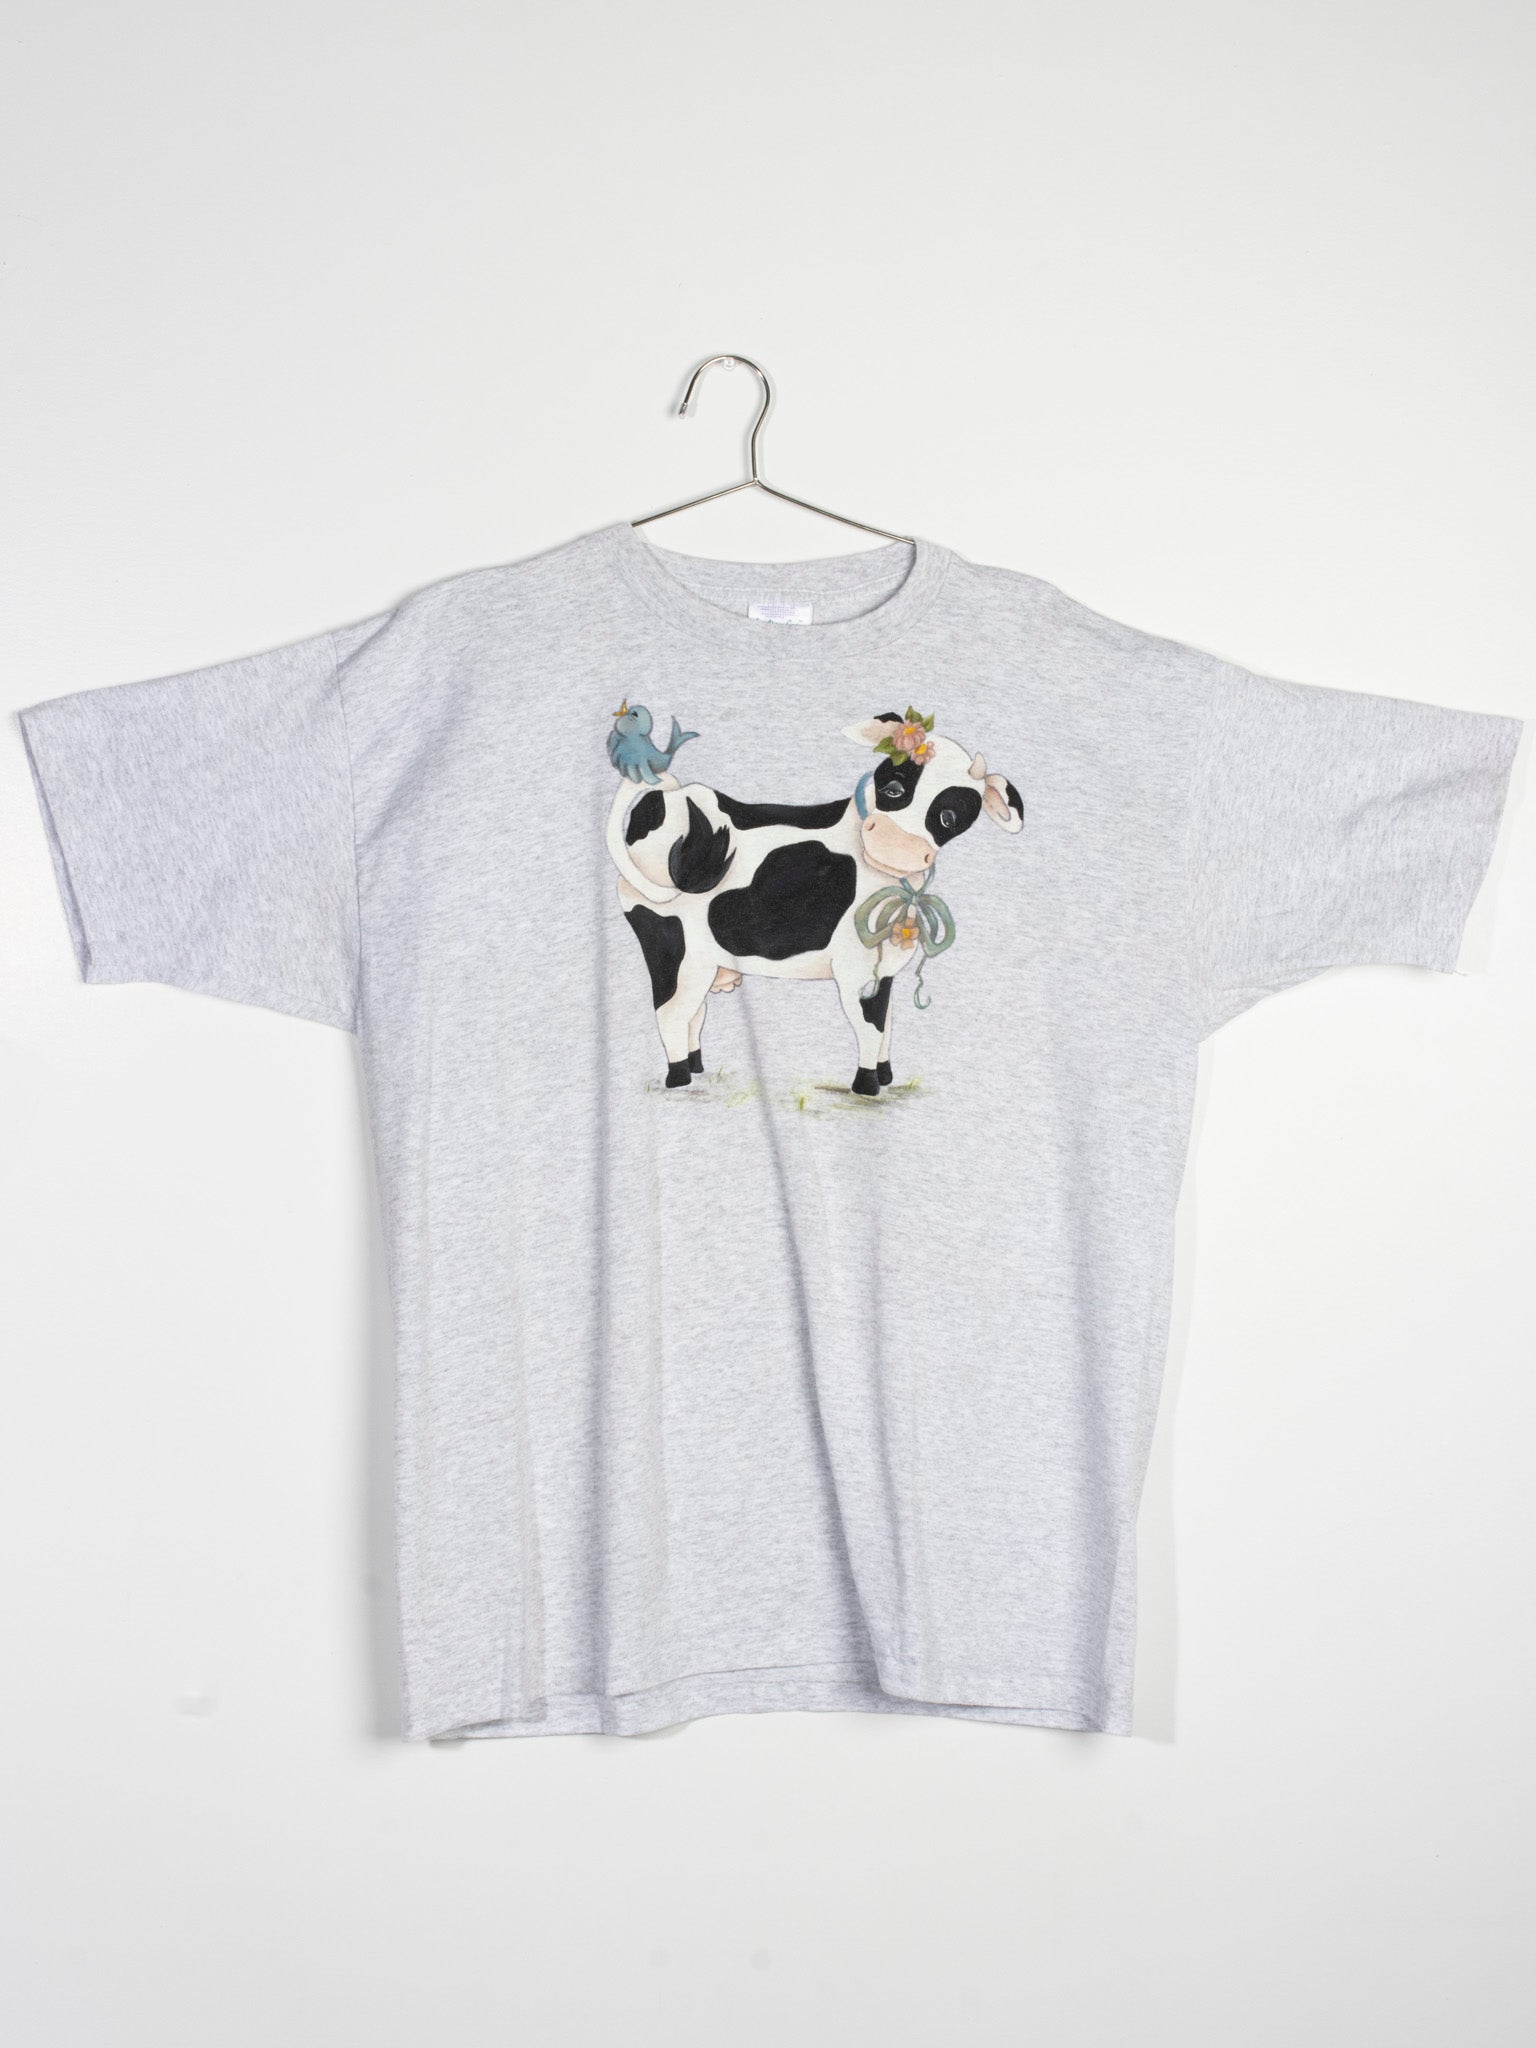 "Cow and Friend" Tee (XL-2X)